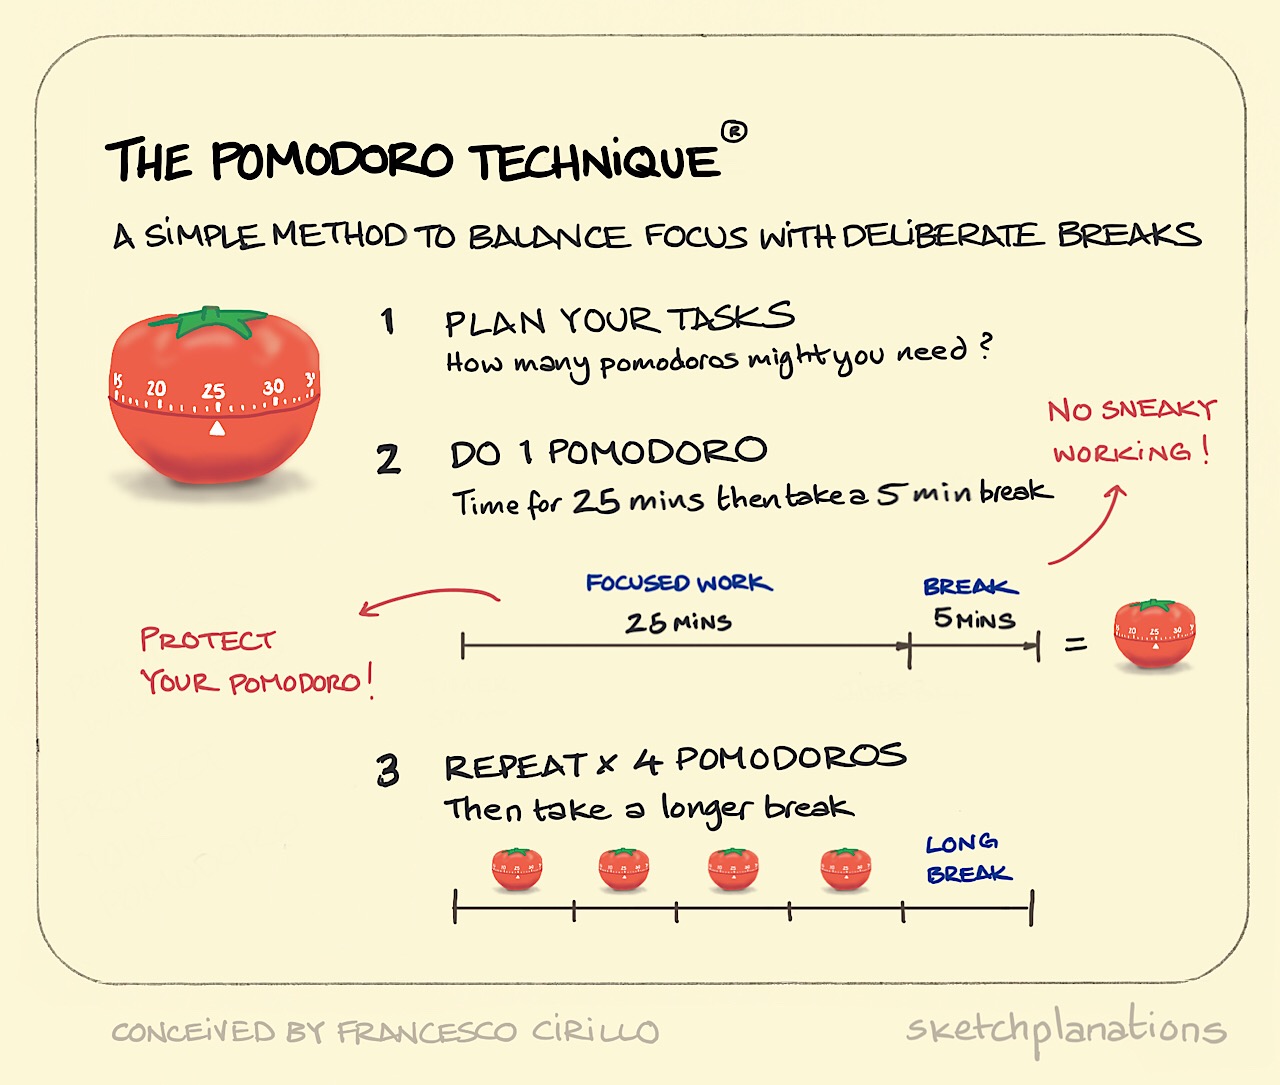 The Pomodoro Technique helps you set aside time to concentrate on the task at hand without any distractions. 